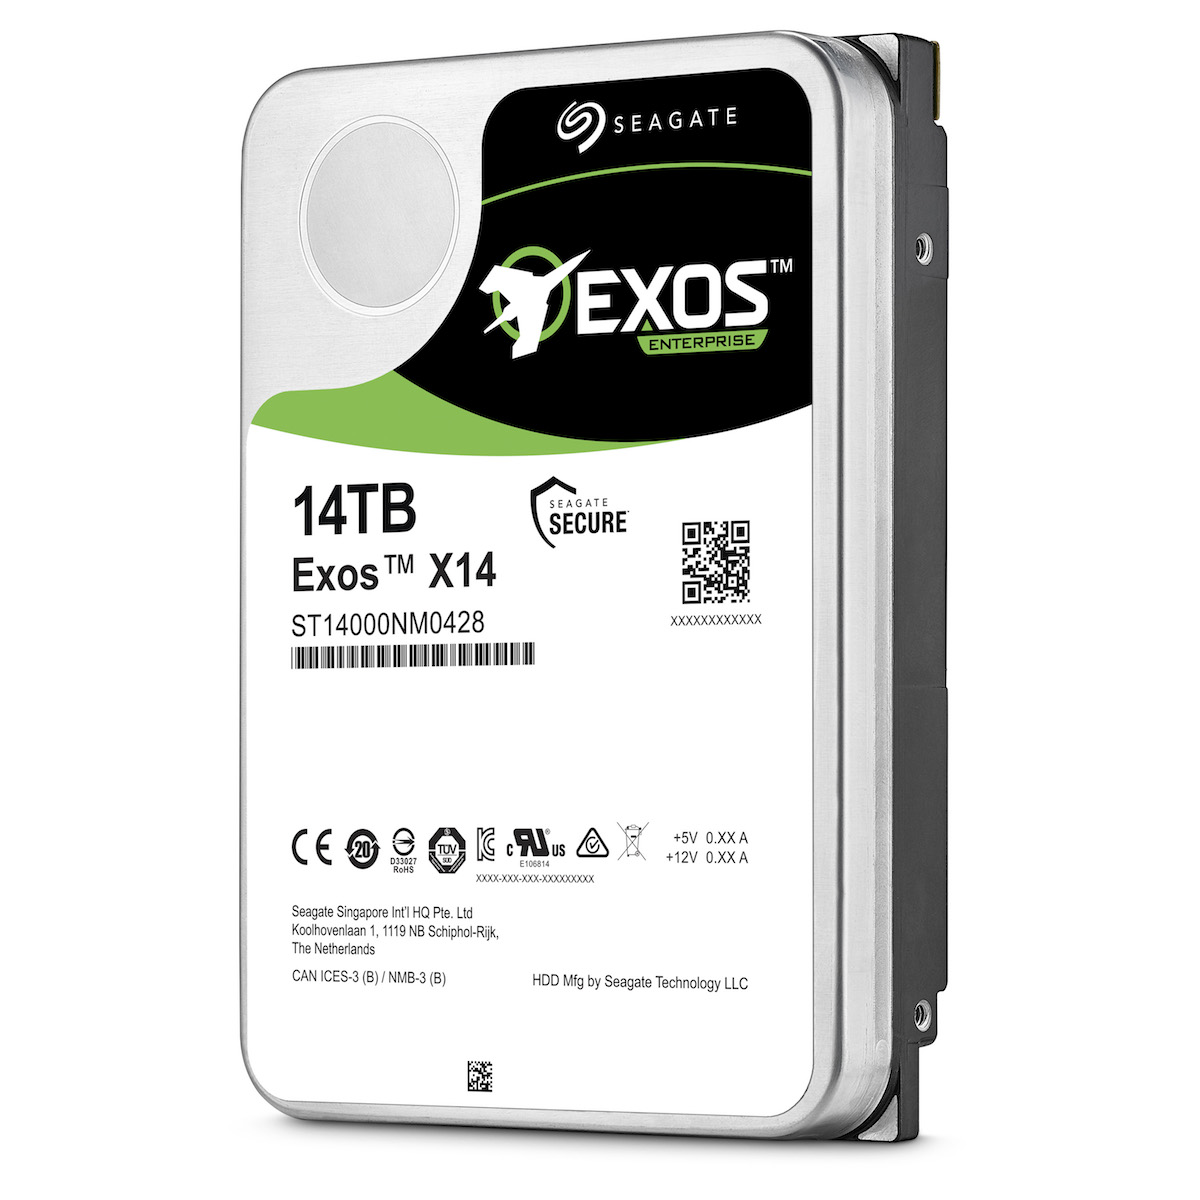 Seagate Exos X14 enterprise drive ideal for hyperscale environments